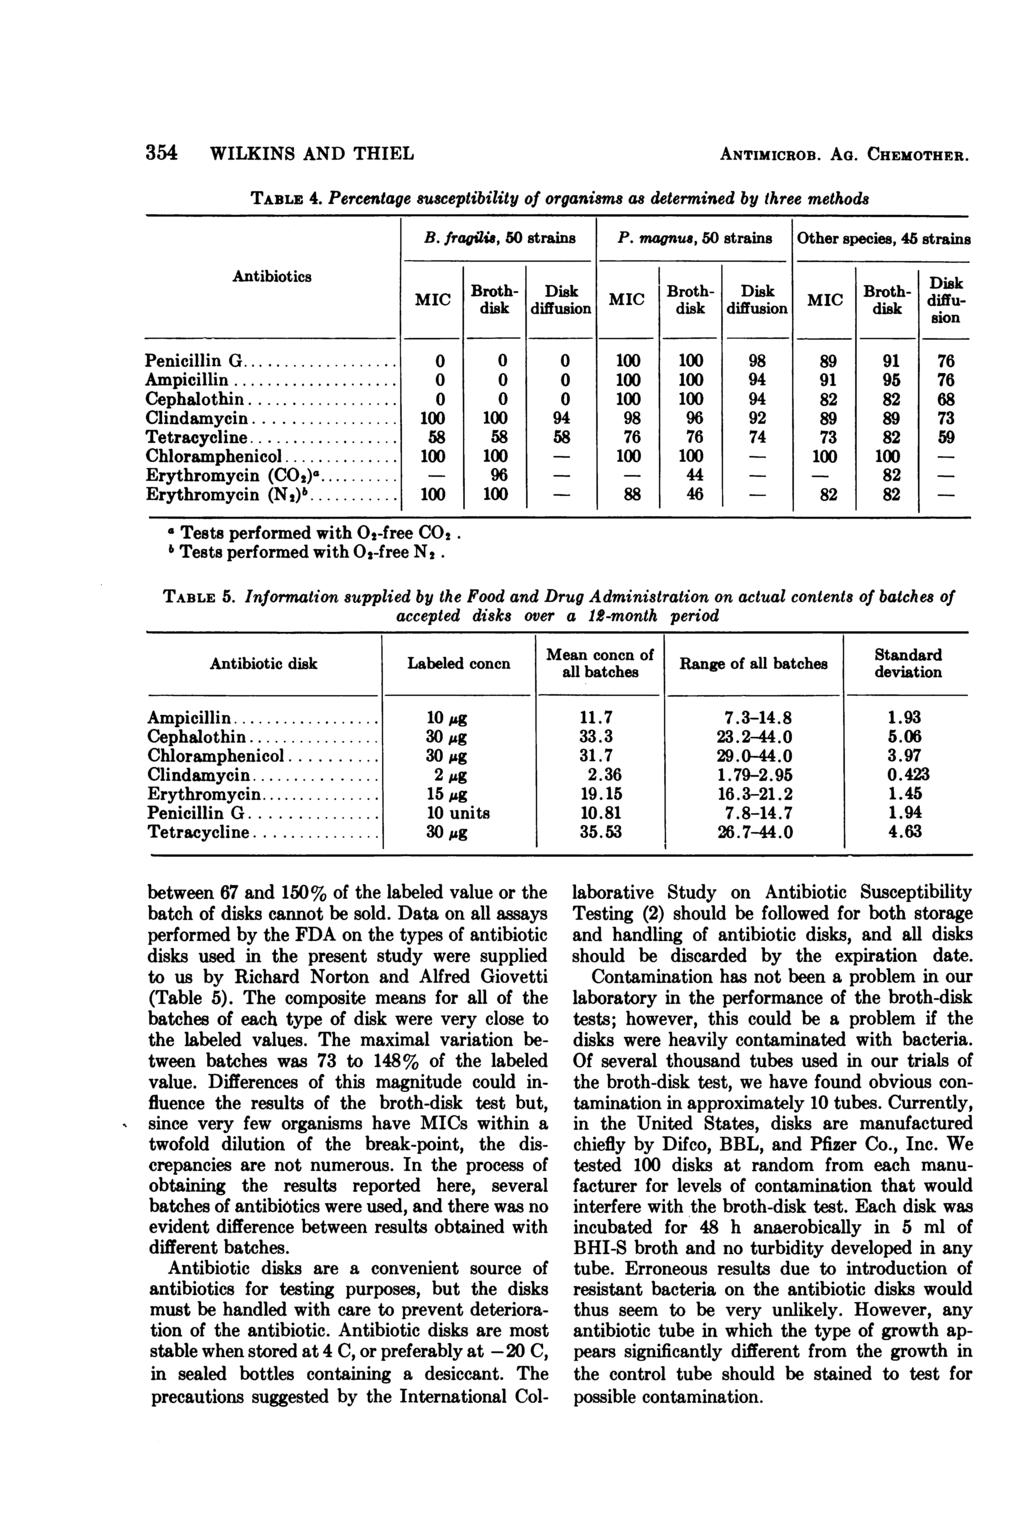 354 WILKINS AND THIEL ANTIMICROB. AG. CHEMOTHER. TABLE 4. Percentage susceptibility of organisms as determined by three methods Antibiotics B. fragili, 50 strains P.